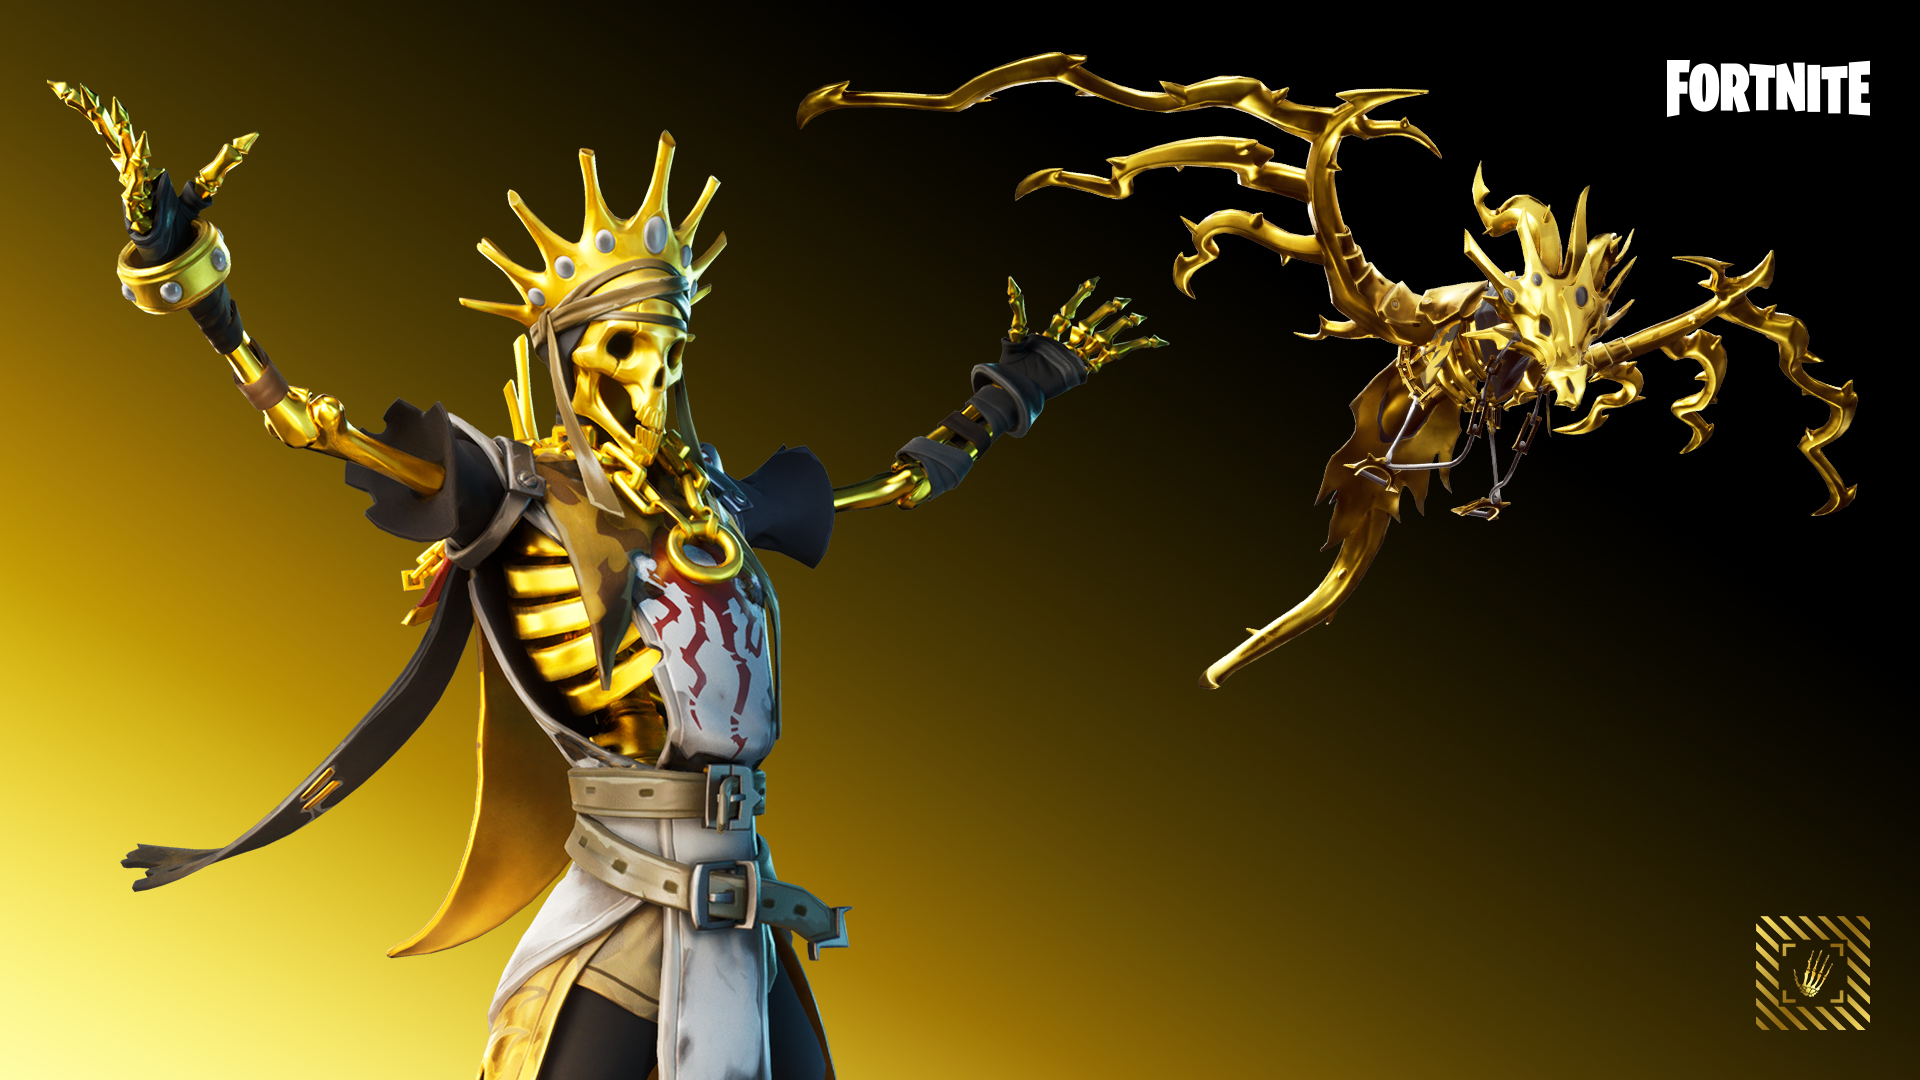 Alta on X: The man with the golden touch Midas --------------------- [Time  taken: 4 hours] Likes and rt's appreciated! Follow for more fortnite art!  #FortniteArt #FortniteChapter2 #Fortnite  / X